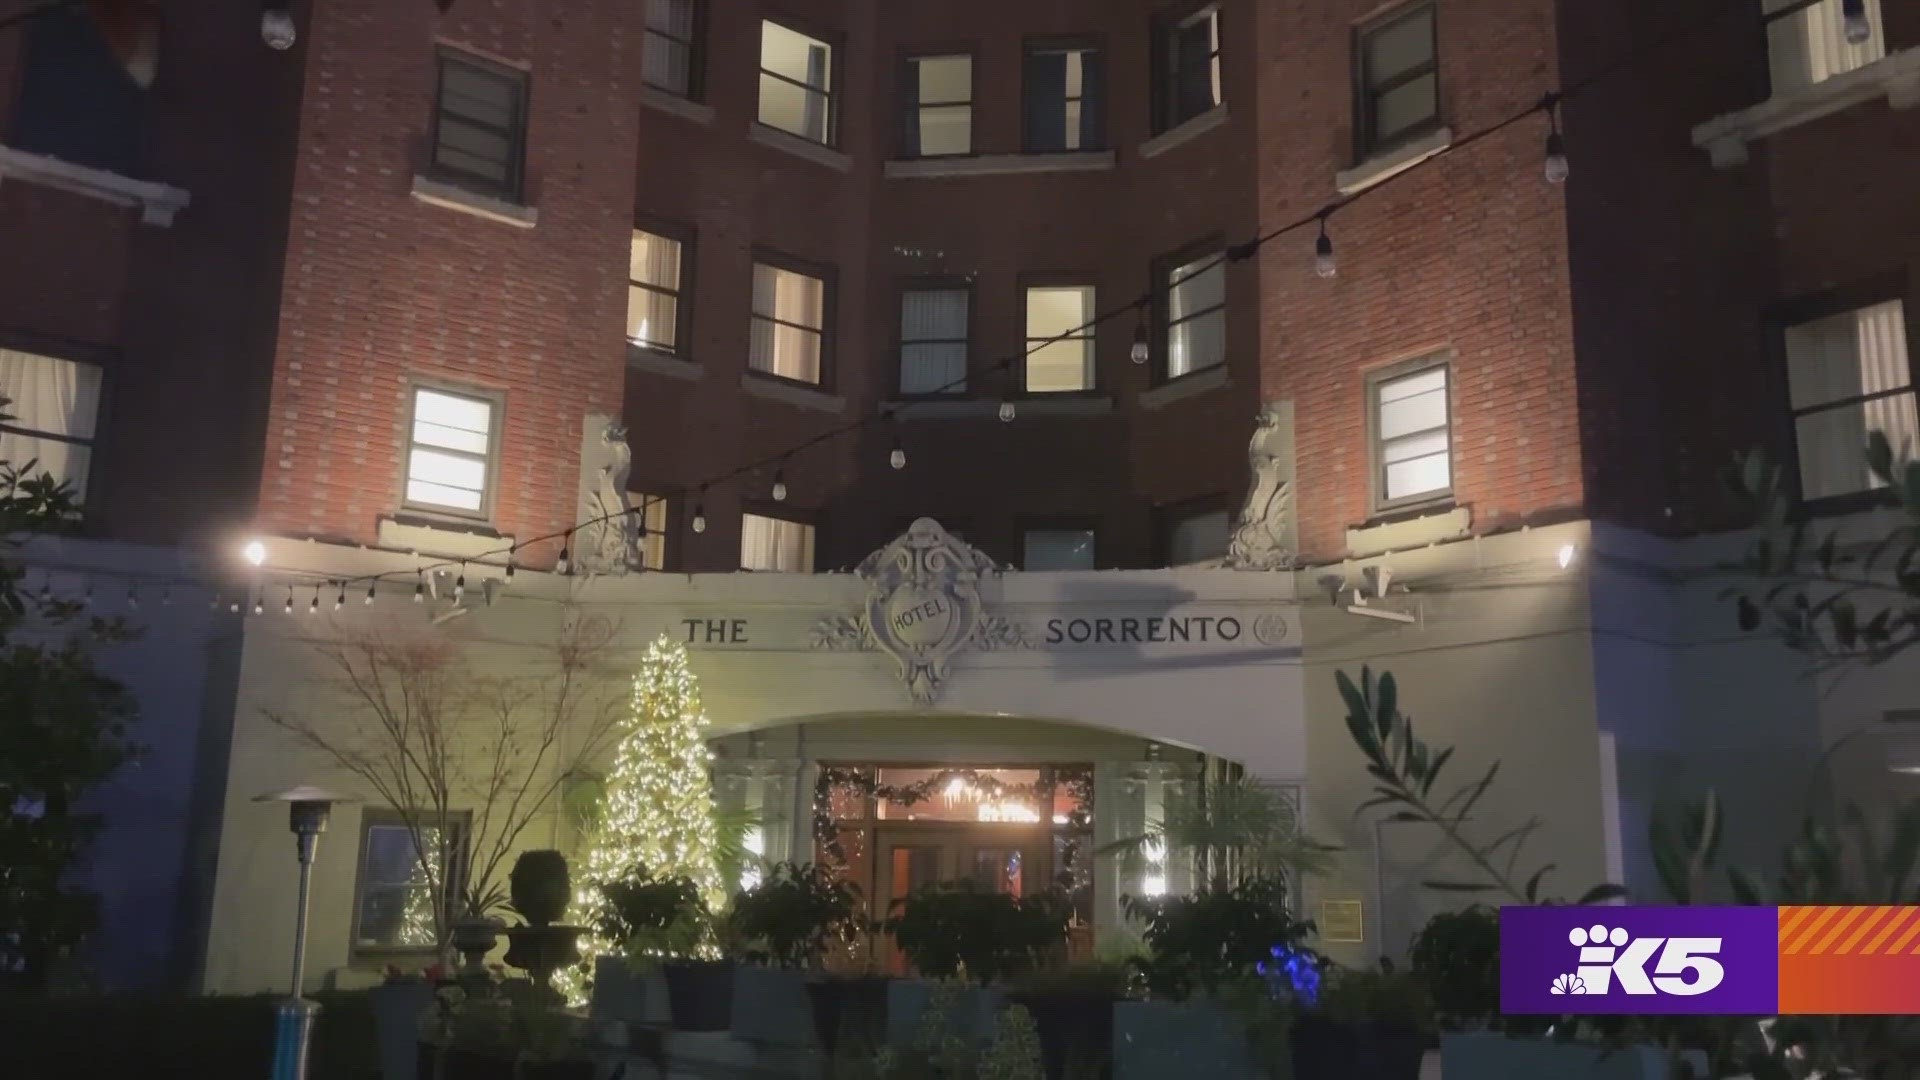 The Hotel Sorrento's bi-monthly reading rager is the quietest and coziest get-together in the Northwest. #k5evening